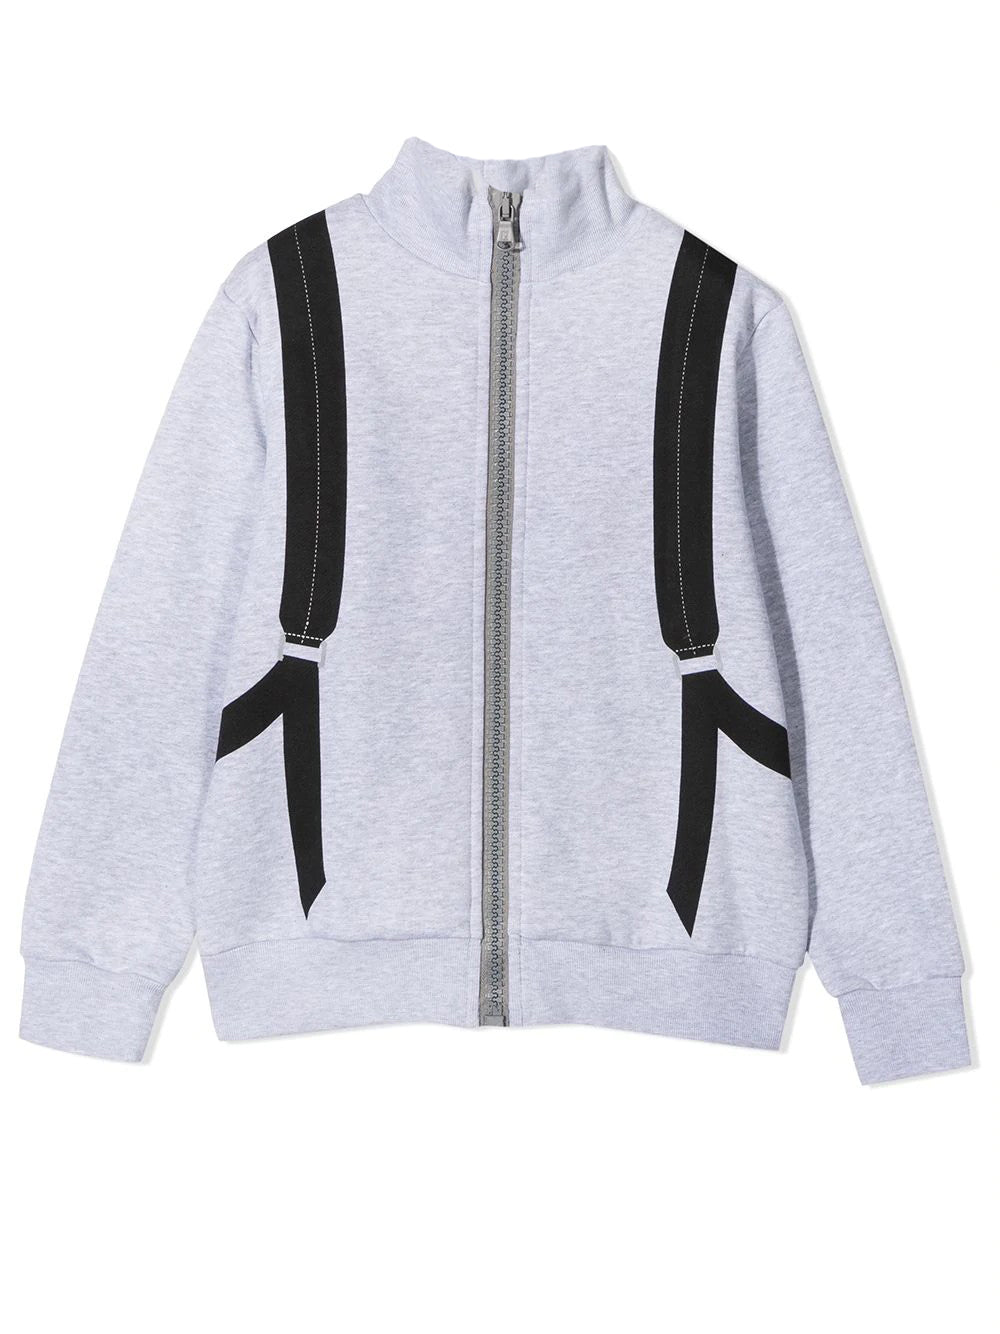 BOYS CARDIGAN WITH BACKPACK AND RACER STRIP DETAILS,GREY - Cémarose Canada